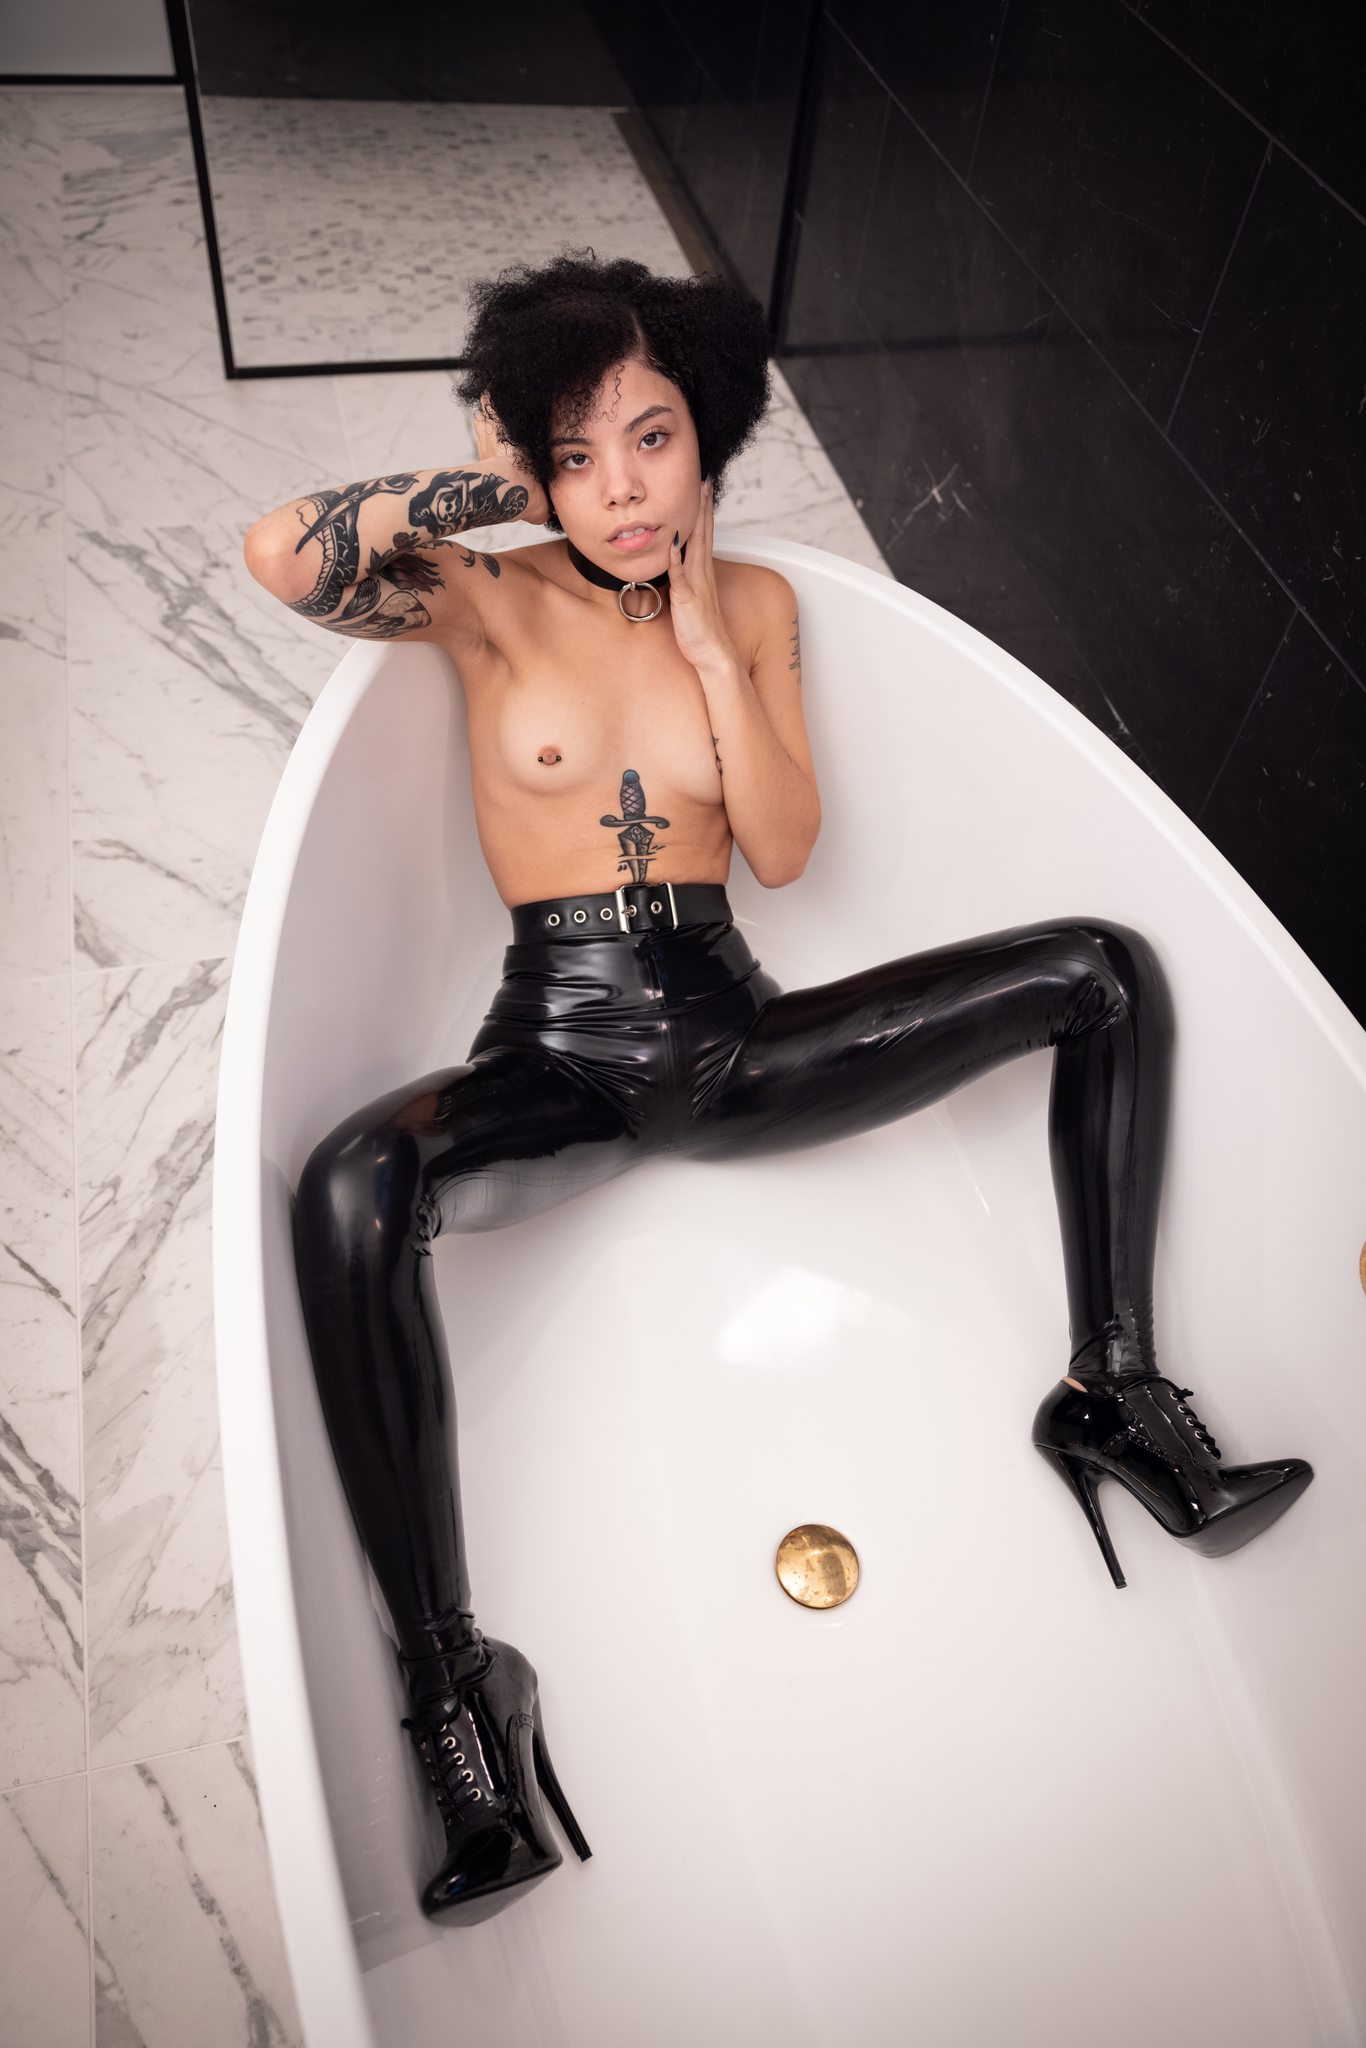 https://images.reflectivedesire.com/photos/shweetie/shweetie-in-black-latex-45.large.jpg